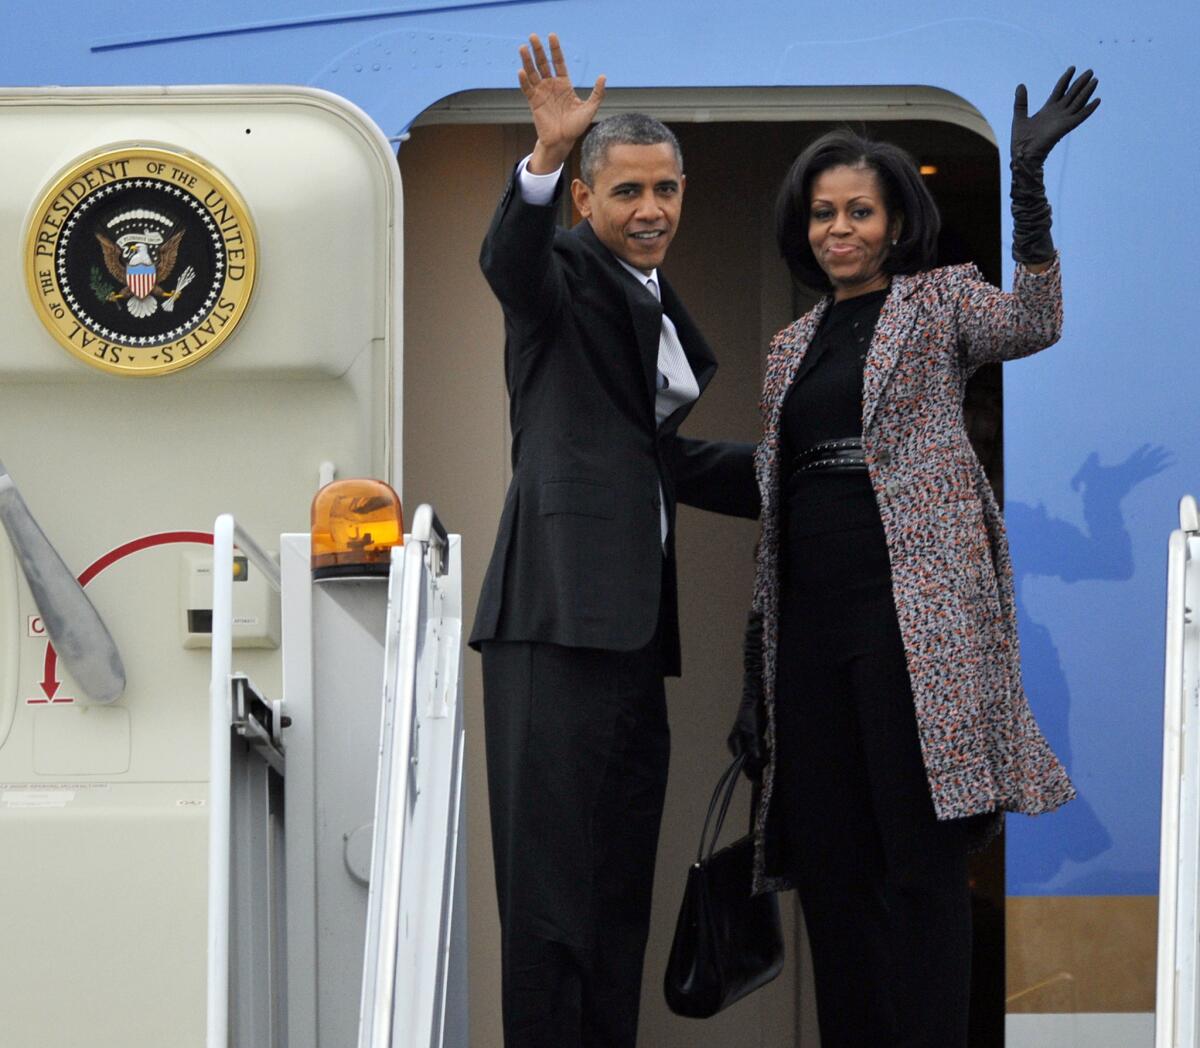 President Barack Obama and first lady Michelle Obama wave while boarding Air Force One before leaving O'Hare International Airport in Chicago, Ill.